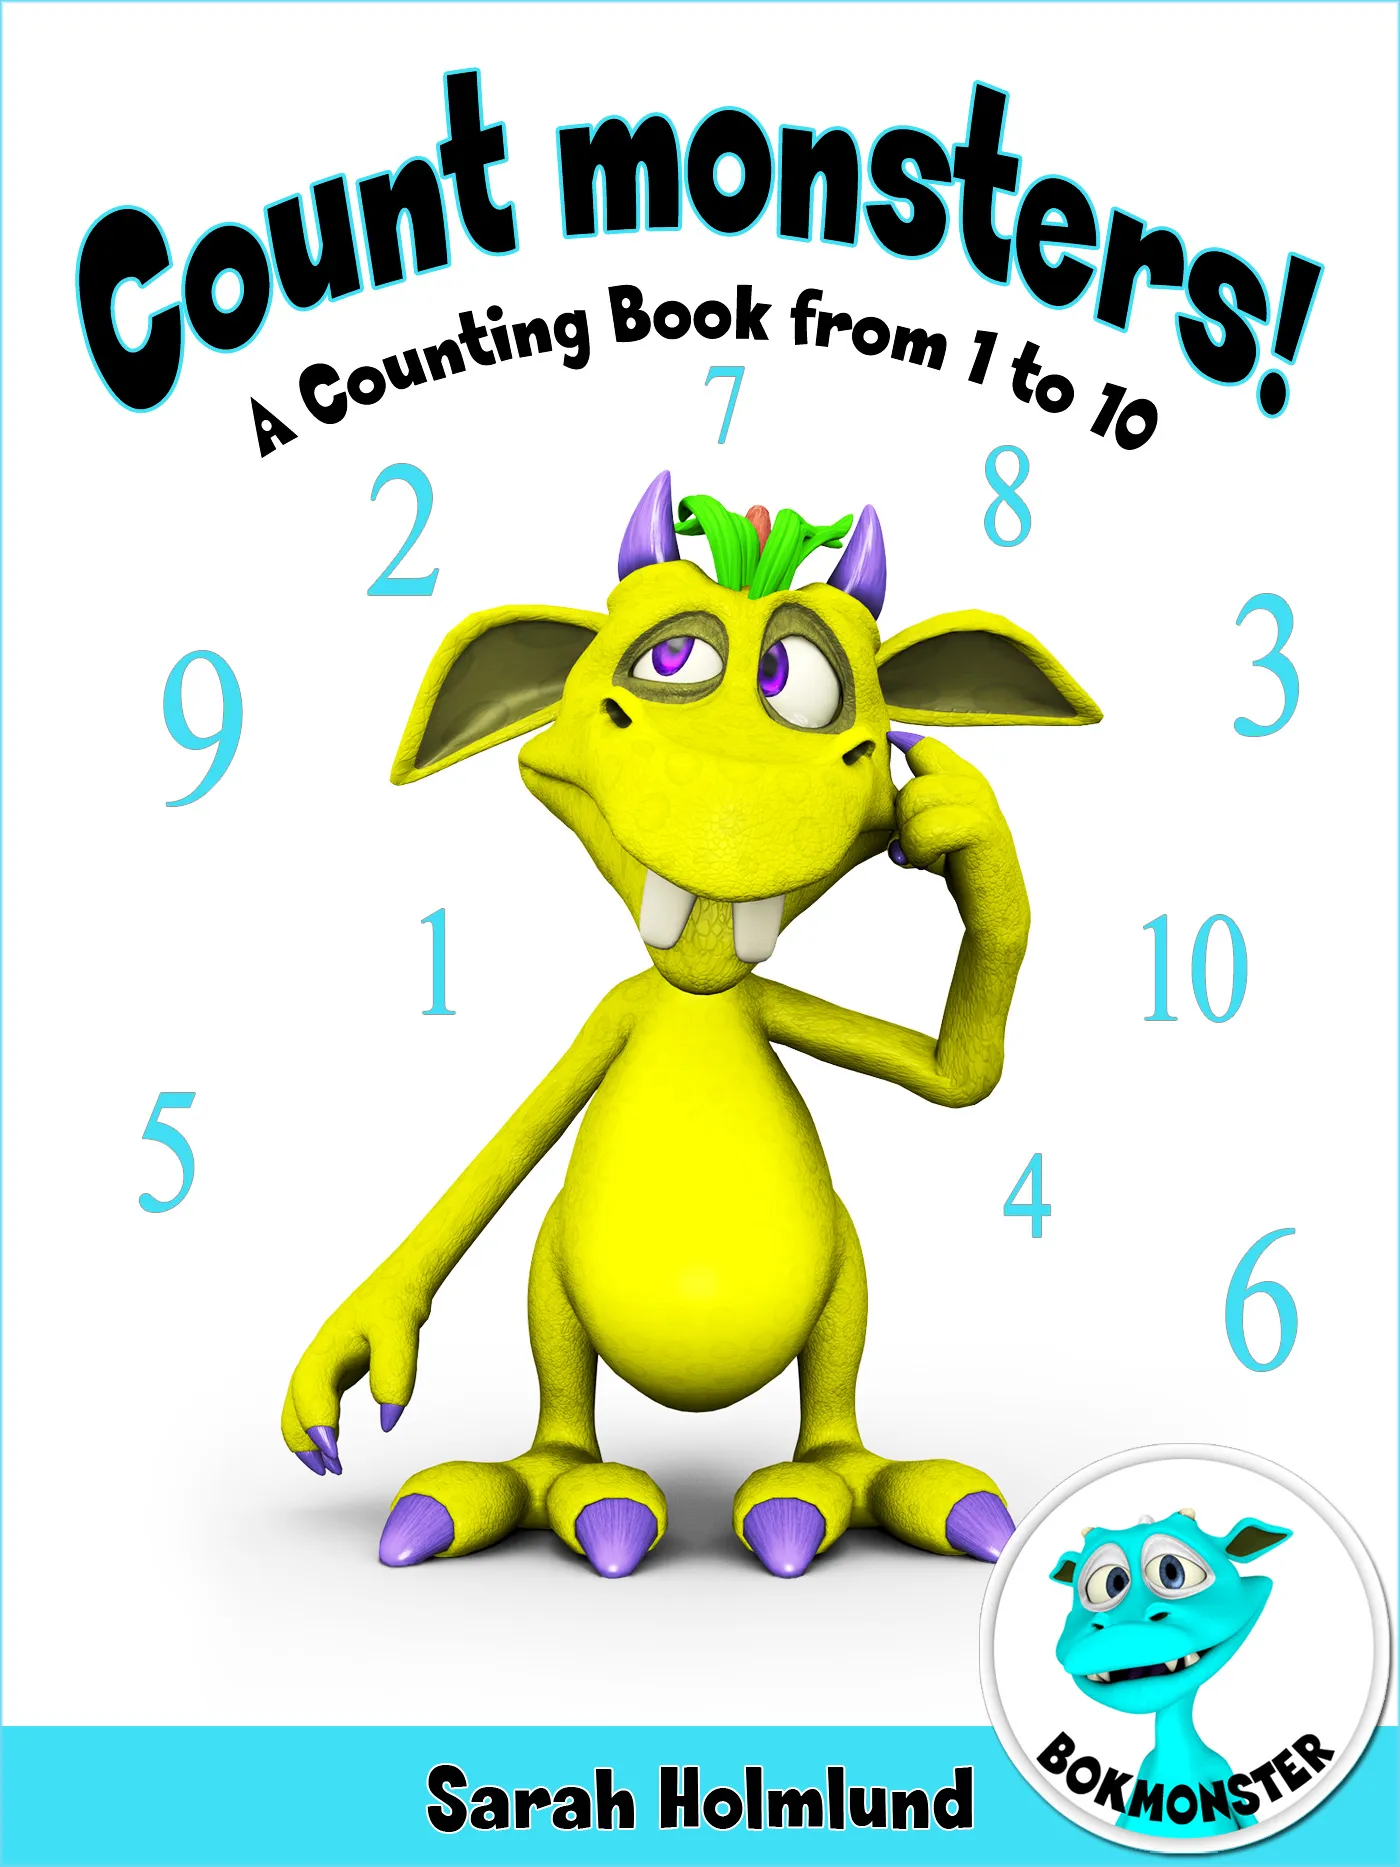 Count monsters! A Counting Book from 1 to 10, eBook by Sarah Holmlund